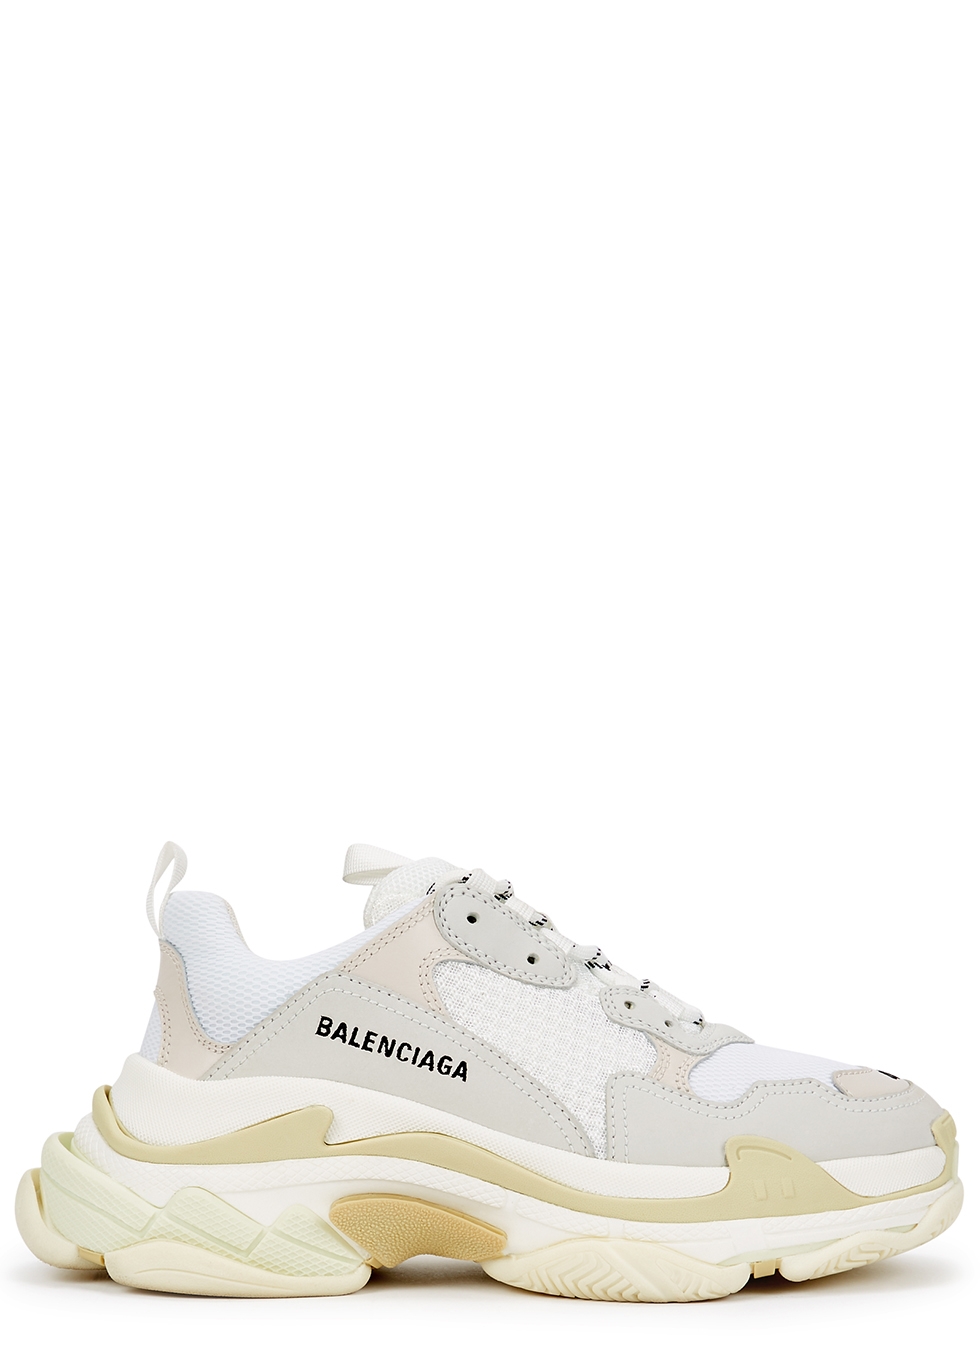 The Balenciaga Triple S is on sale 40% off with FREE shipping